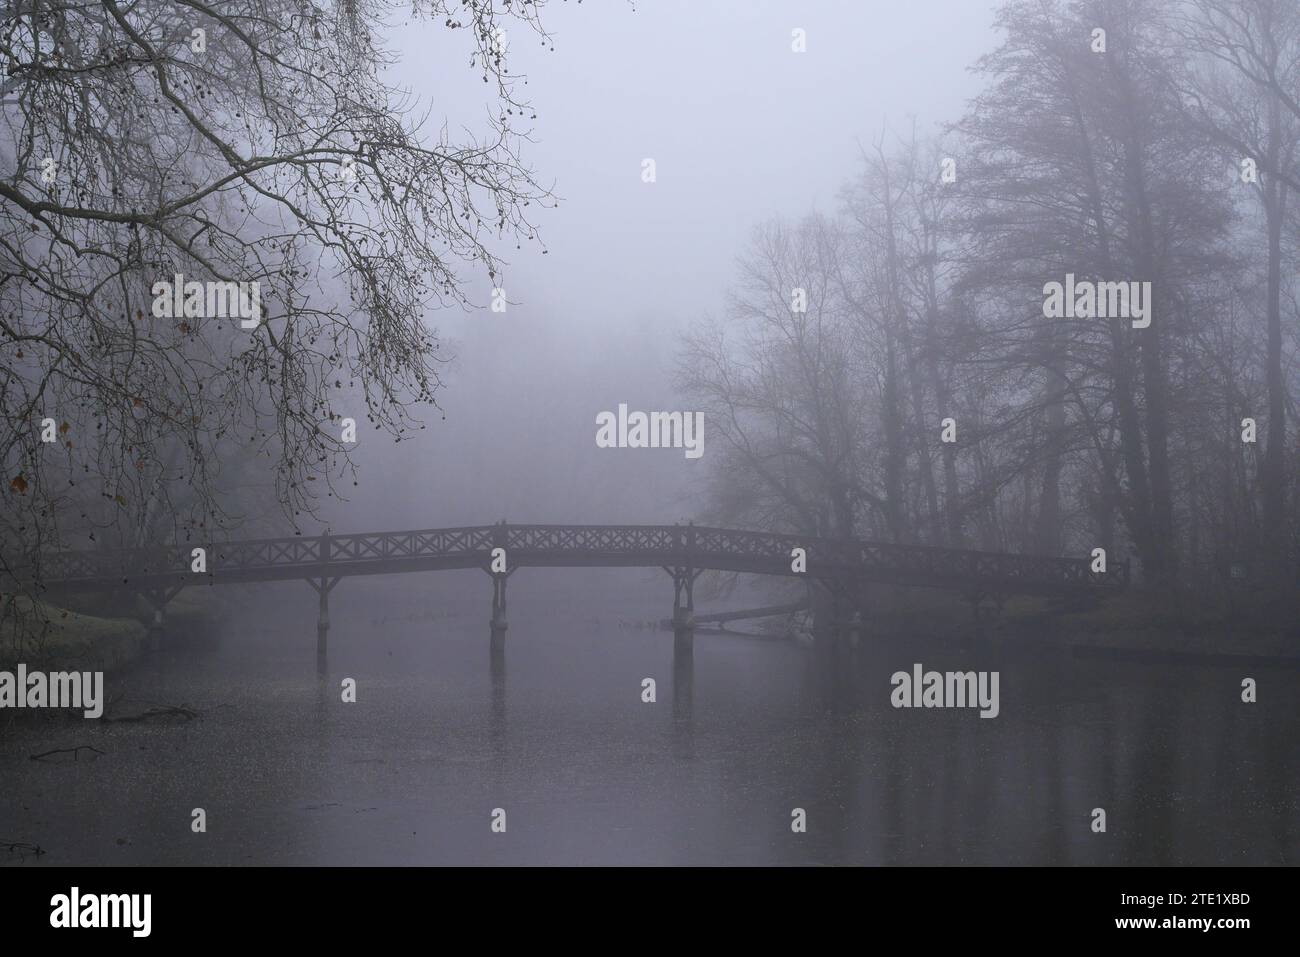 Footbridge to the island on the lake in the English garden of the Brunswick mansion, on a cold foggy day in winter, Martonvasar, Hungary Stock Photo